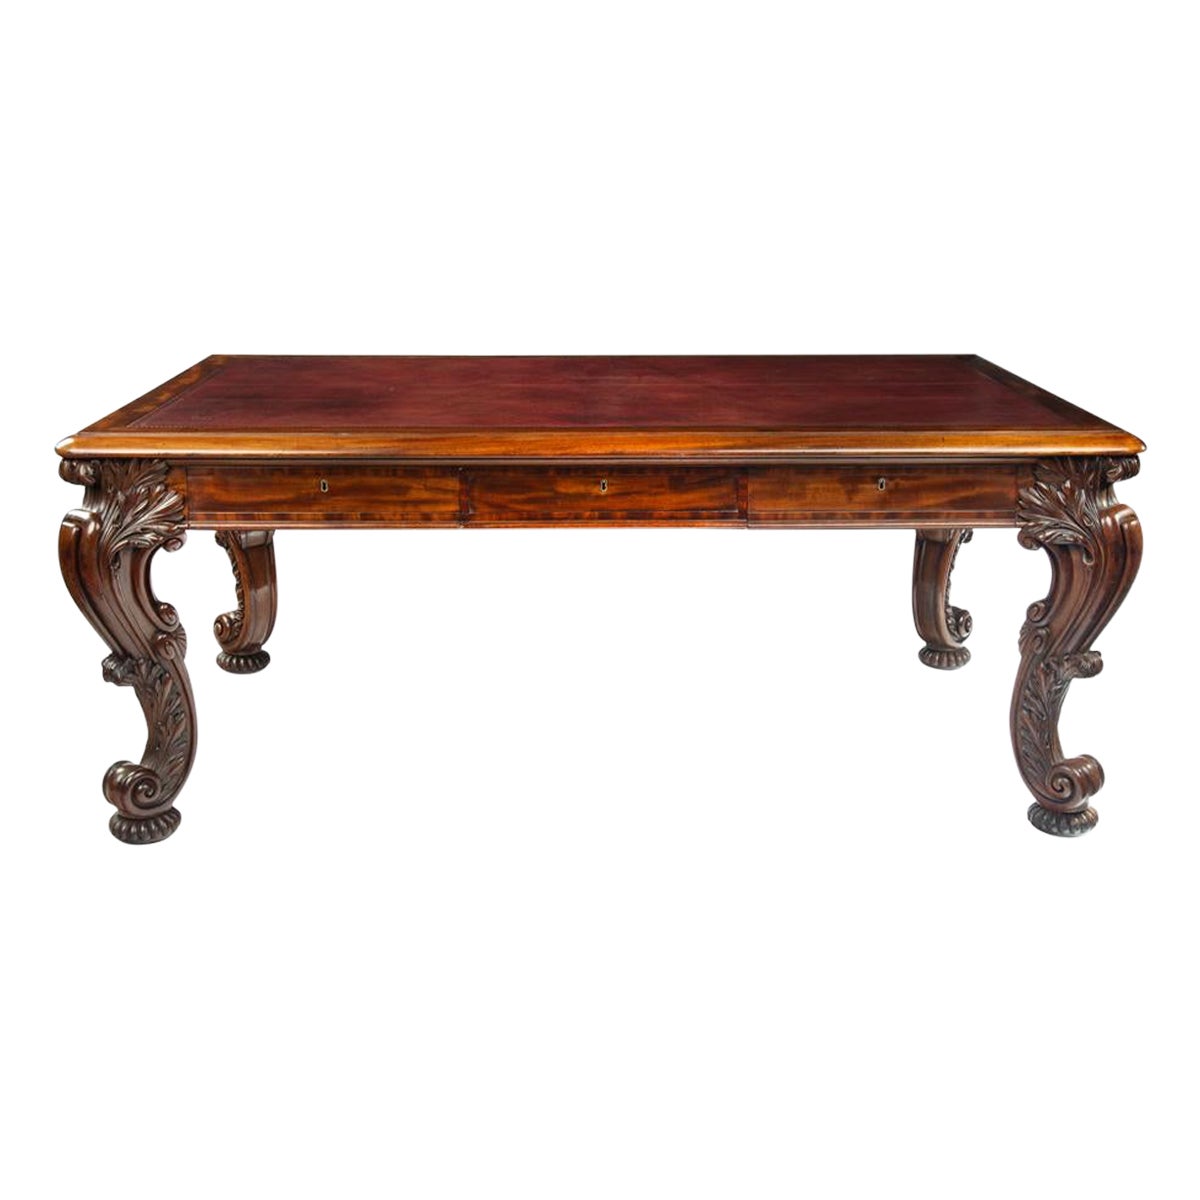 A large late Regency mahogany partner’s library table attributed to Gillows For Sale